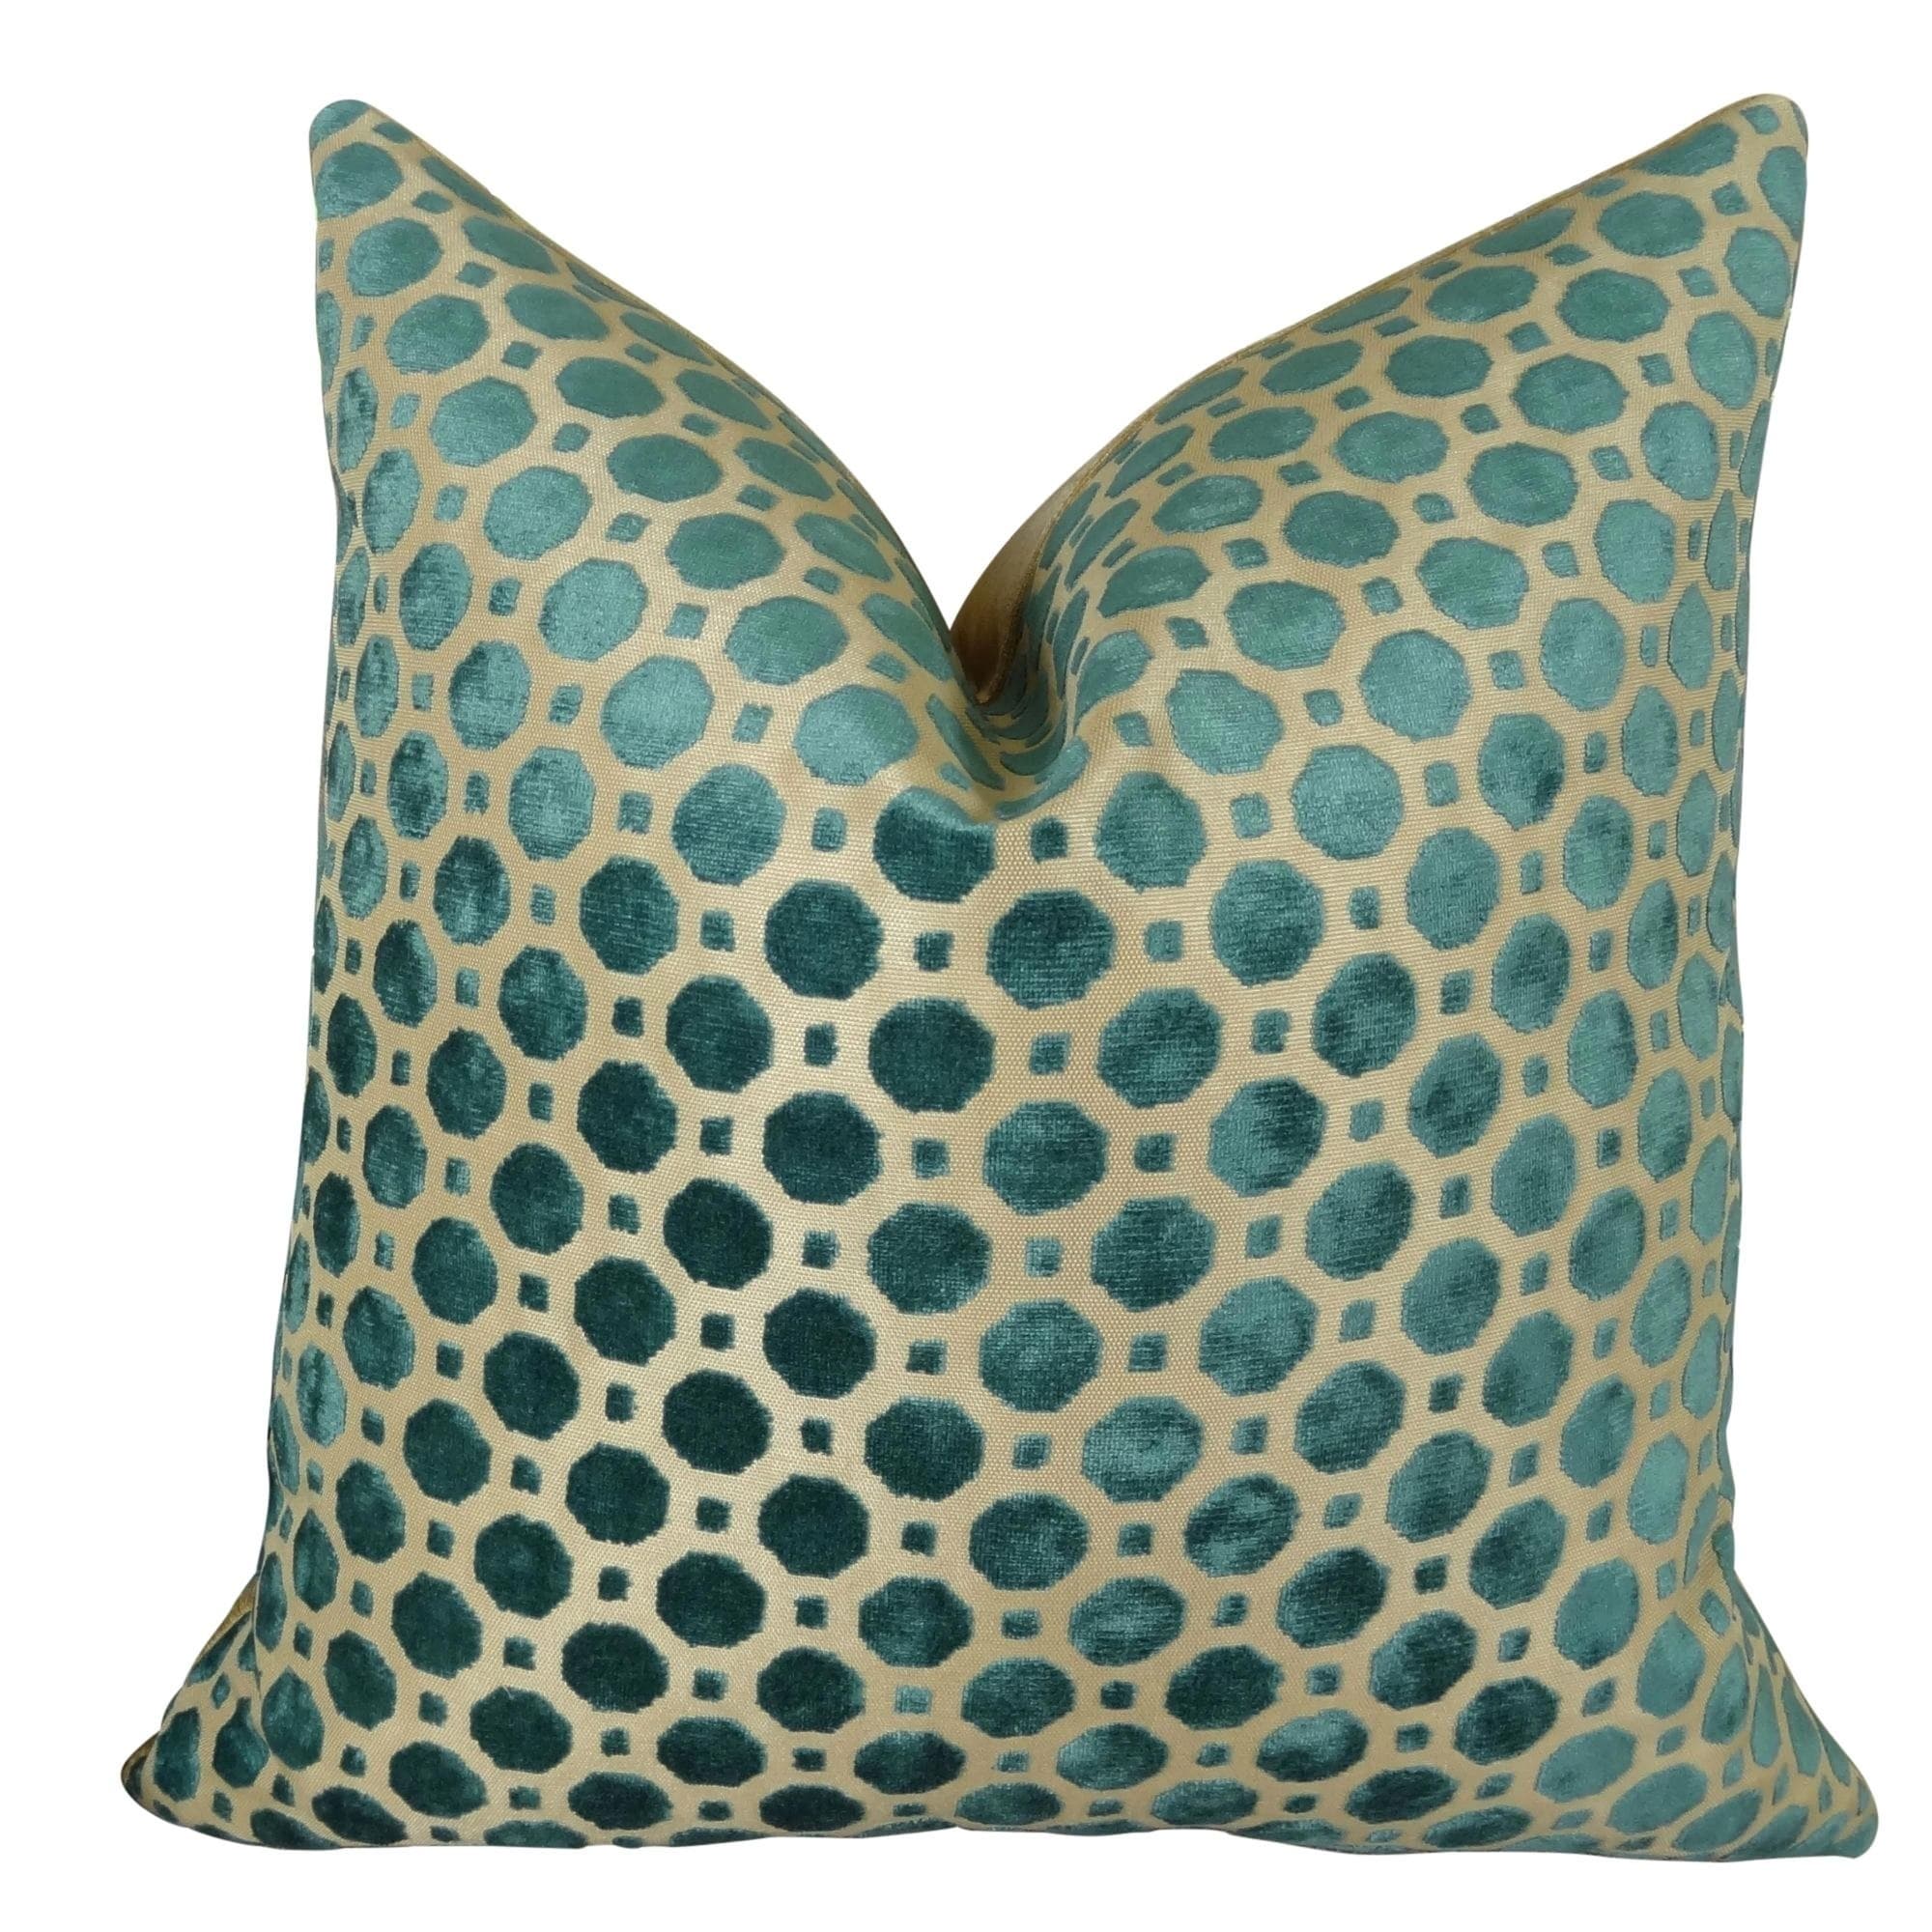 https://ak1.ostkcdn.com/images/products/20895867/Thomas-Collection-Turquoise-Taupe-Velvet-Geometric-Luxury-Throw-Pillow-Handmade-in-USA-11364D-df8705c2-65ba-4872-890e-db0a9110c065.jpg